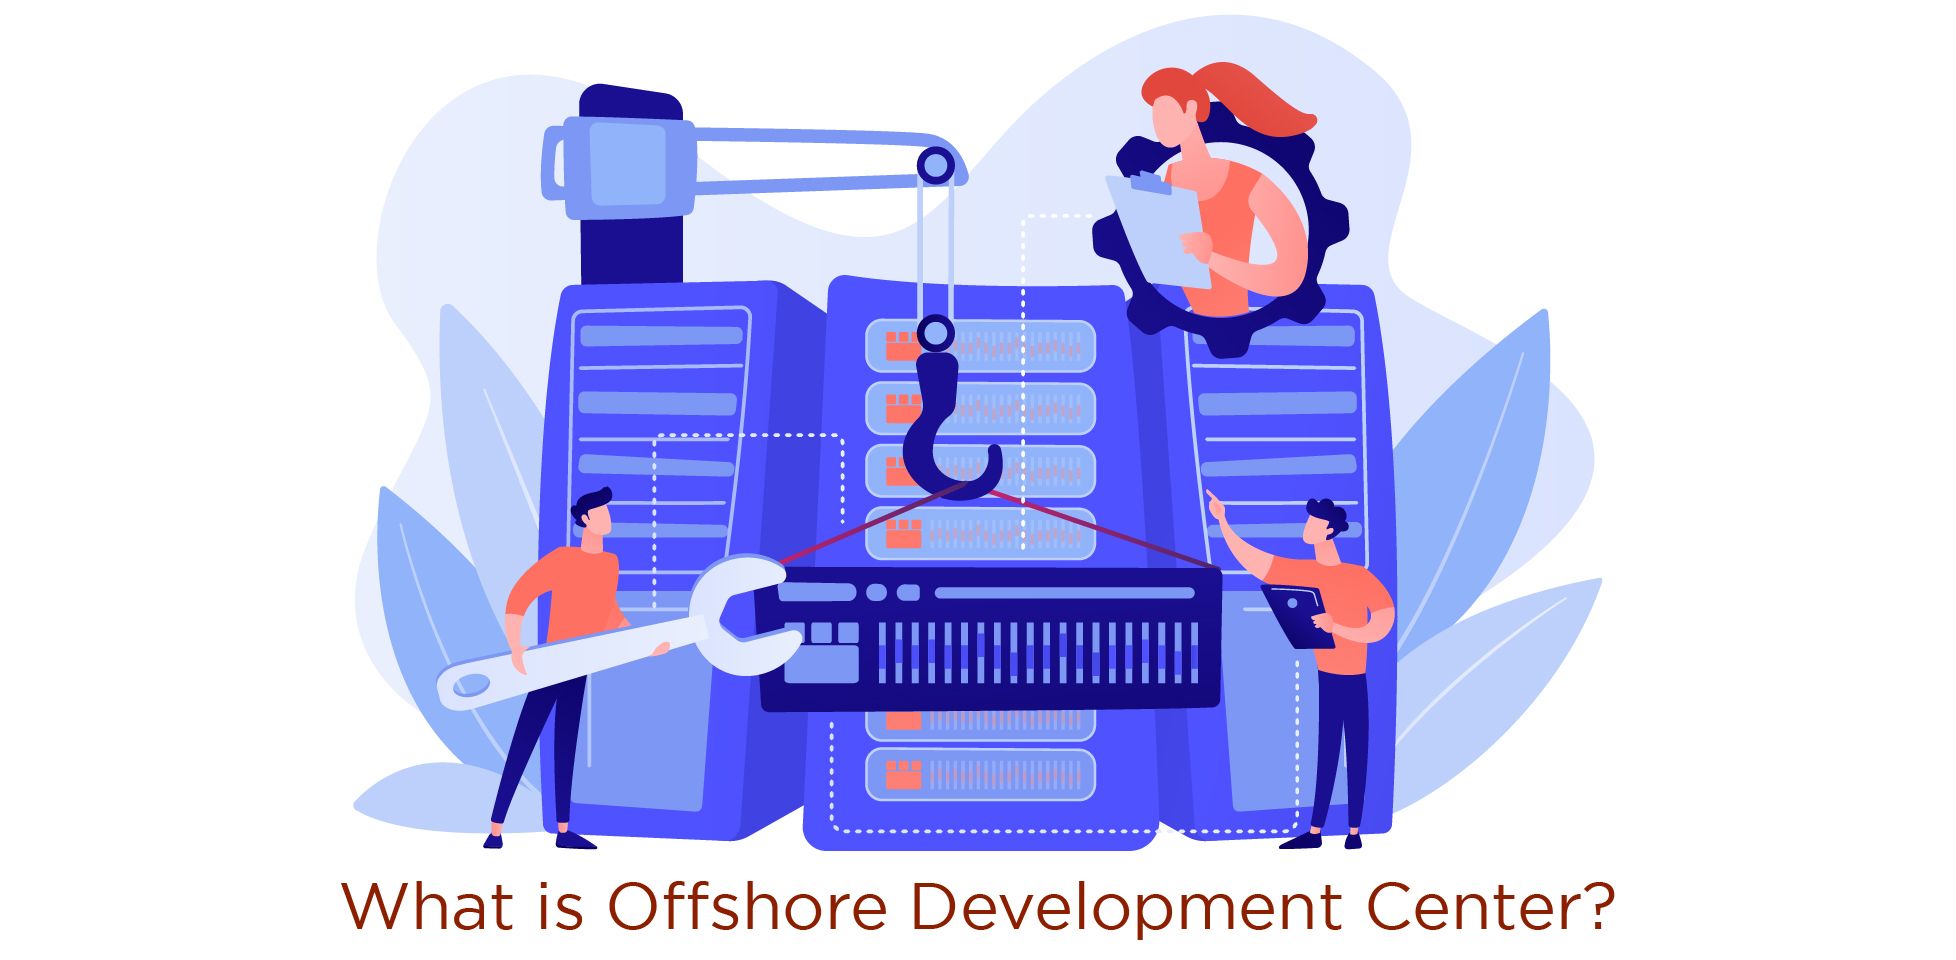 What is an offshore development center? 